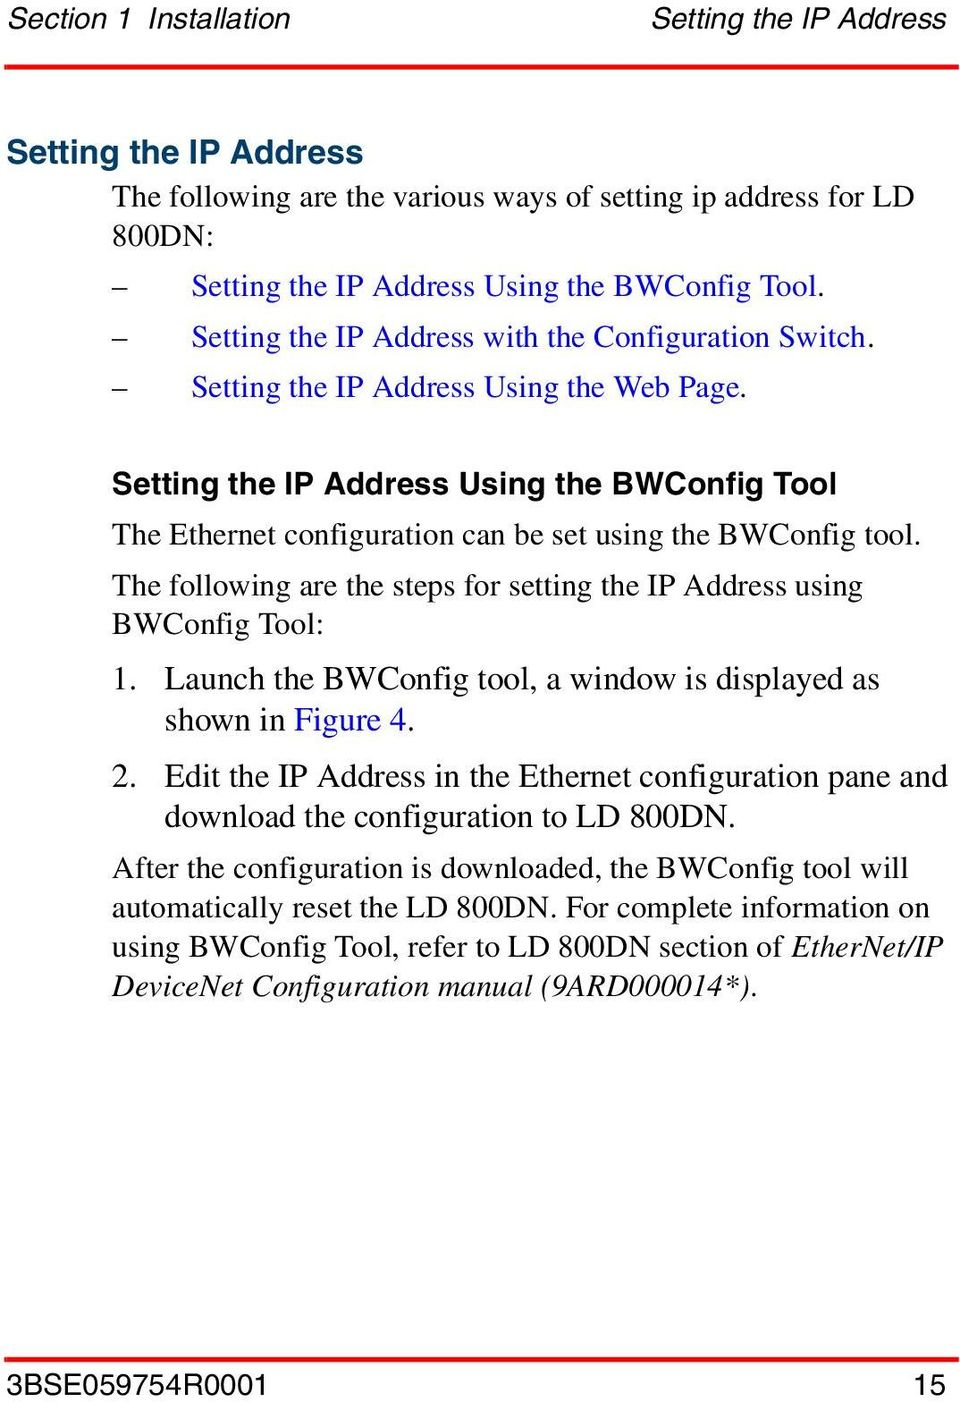 Setting the IP Address Using the BWConfig Tool The Ethernet configuration can be set using the BWConfig tool. The following are the steps for setting the IP Address using BWConfig Tool: 1.